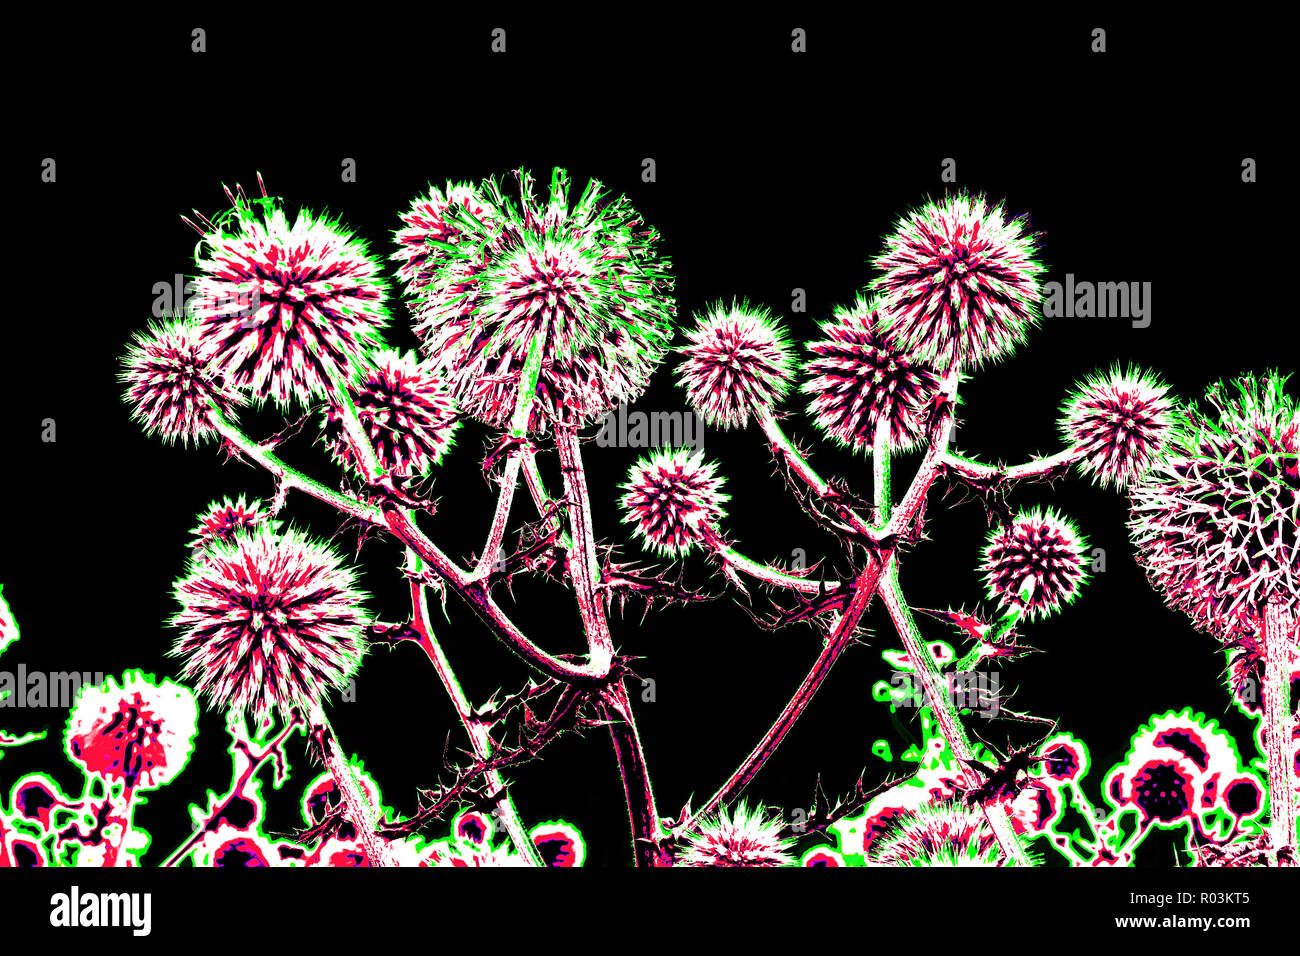 Spherical thistle flowers (Echinops ritro) on the black background. Toned herbal texture in bright saturated colors Stock Photo